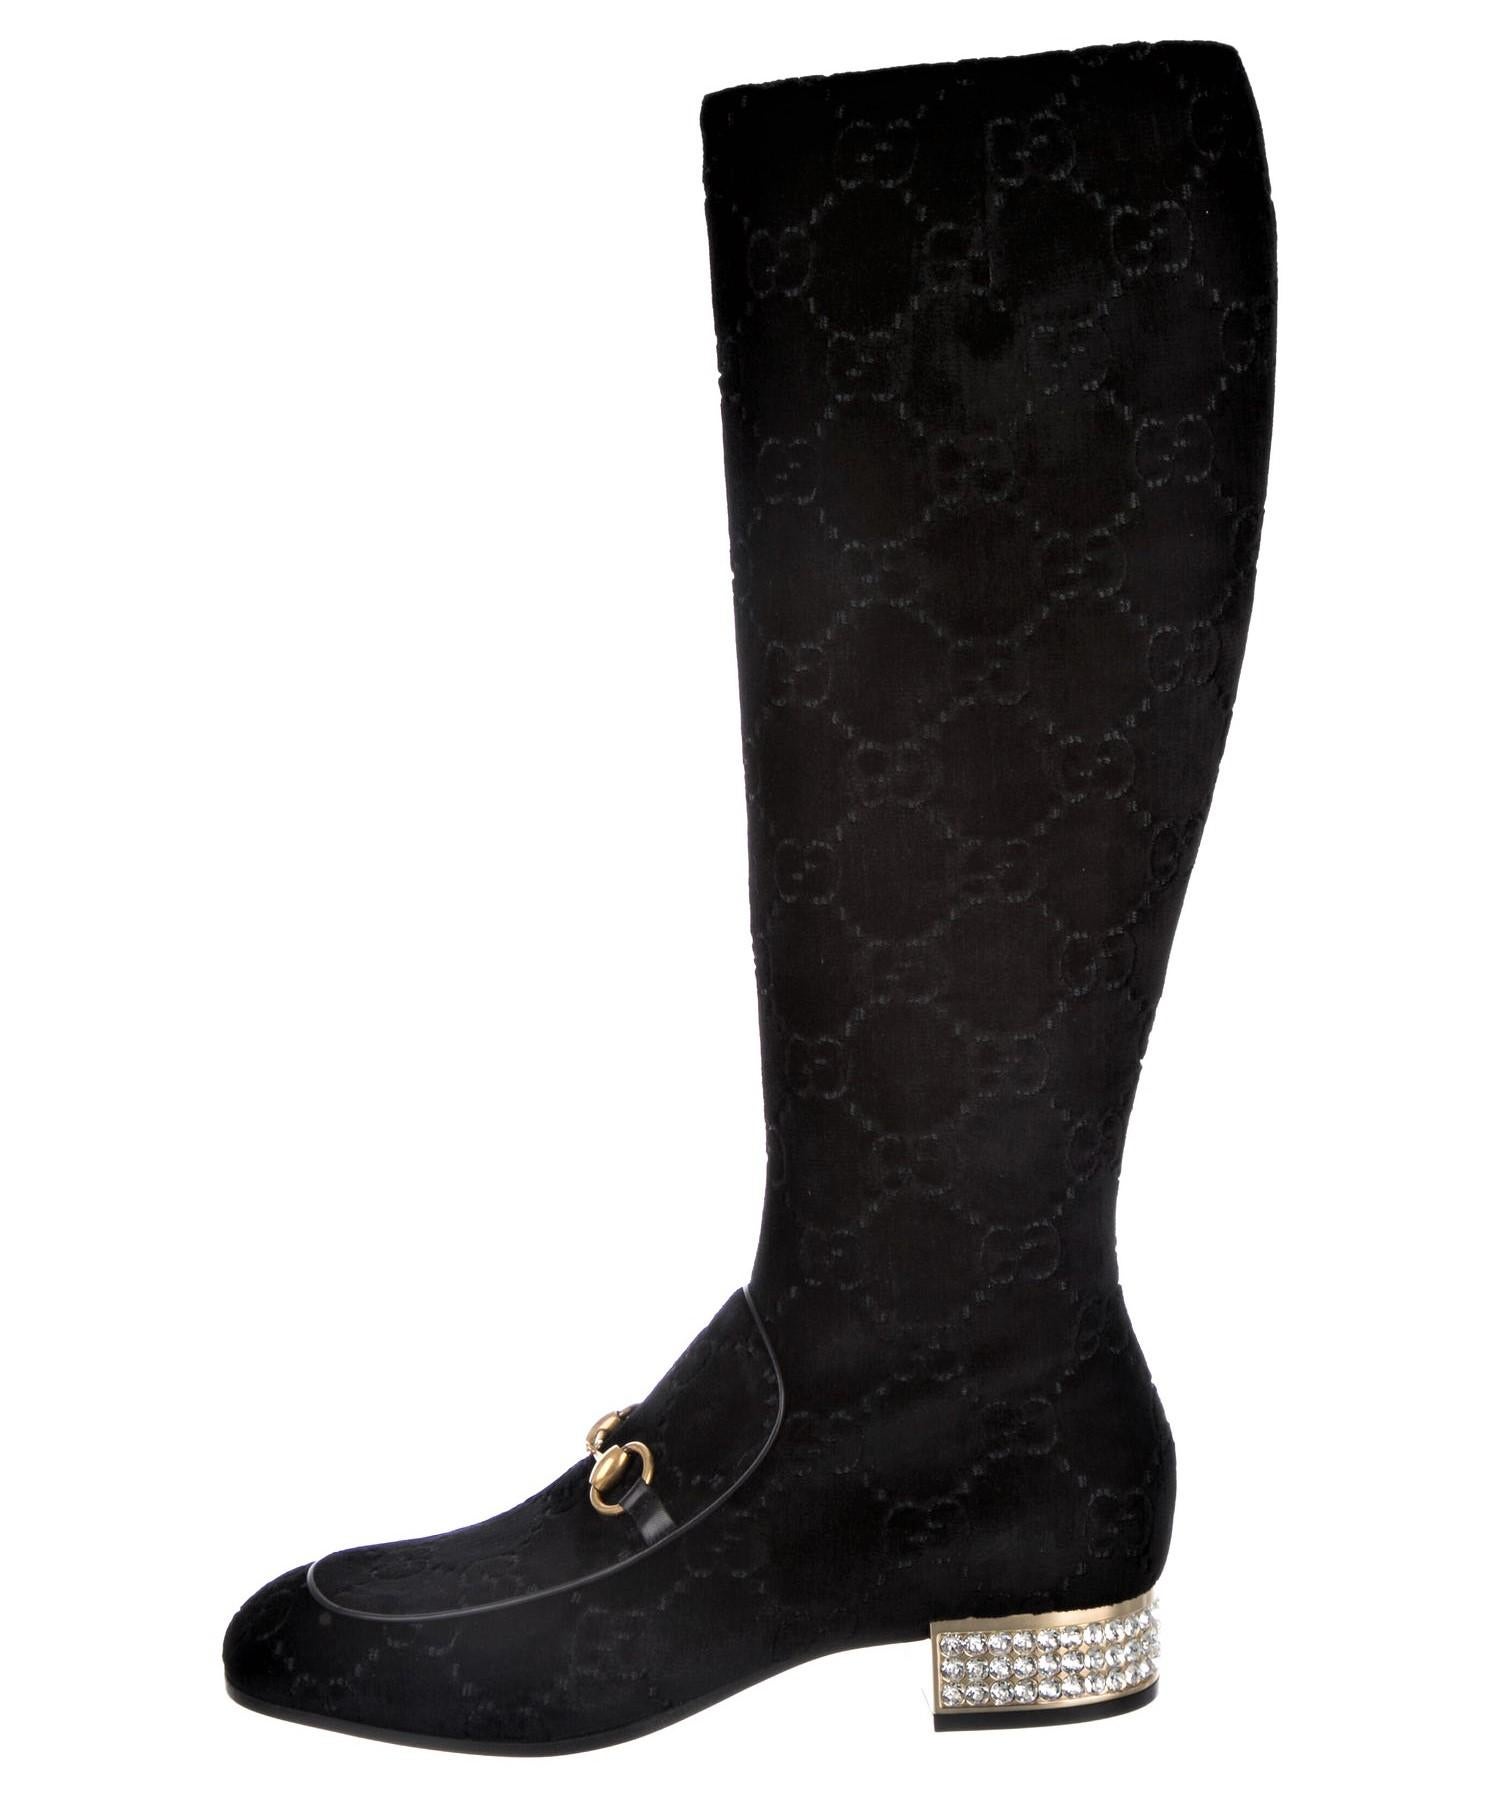 Gucci
Brand New with Box
* Black GG Velvet Boots
* Gold Horsebit Accent
* Crystal Heels
* Size: 37